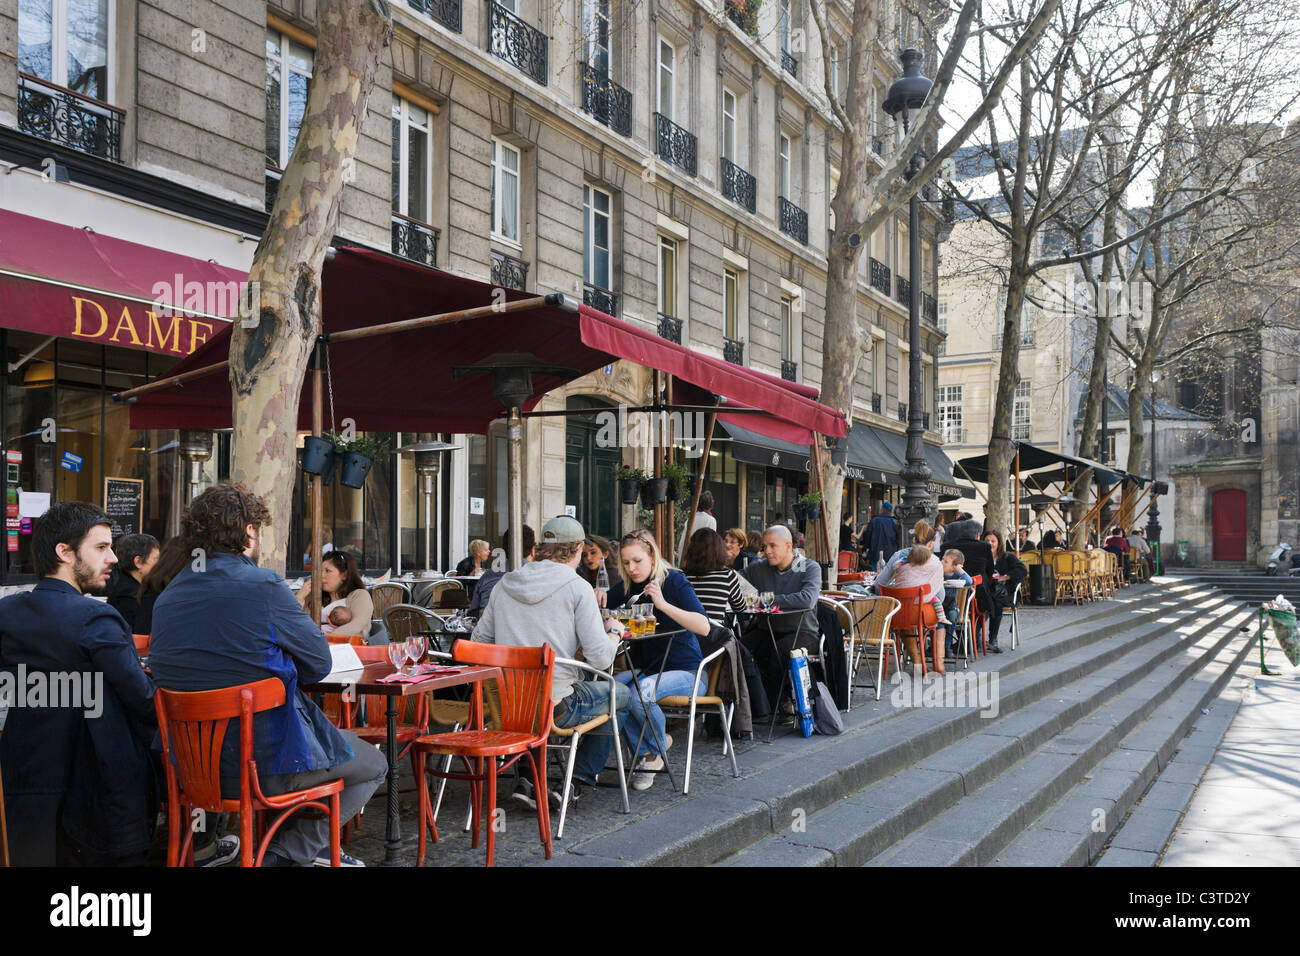 Pavement cafe in Place Igor Stravinsky outside the Pompidou Centre, Beaubourg district, 4th Arrondissement, Paris, France Stock Photo